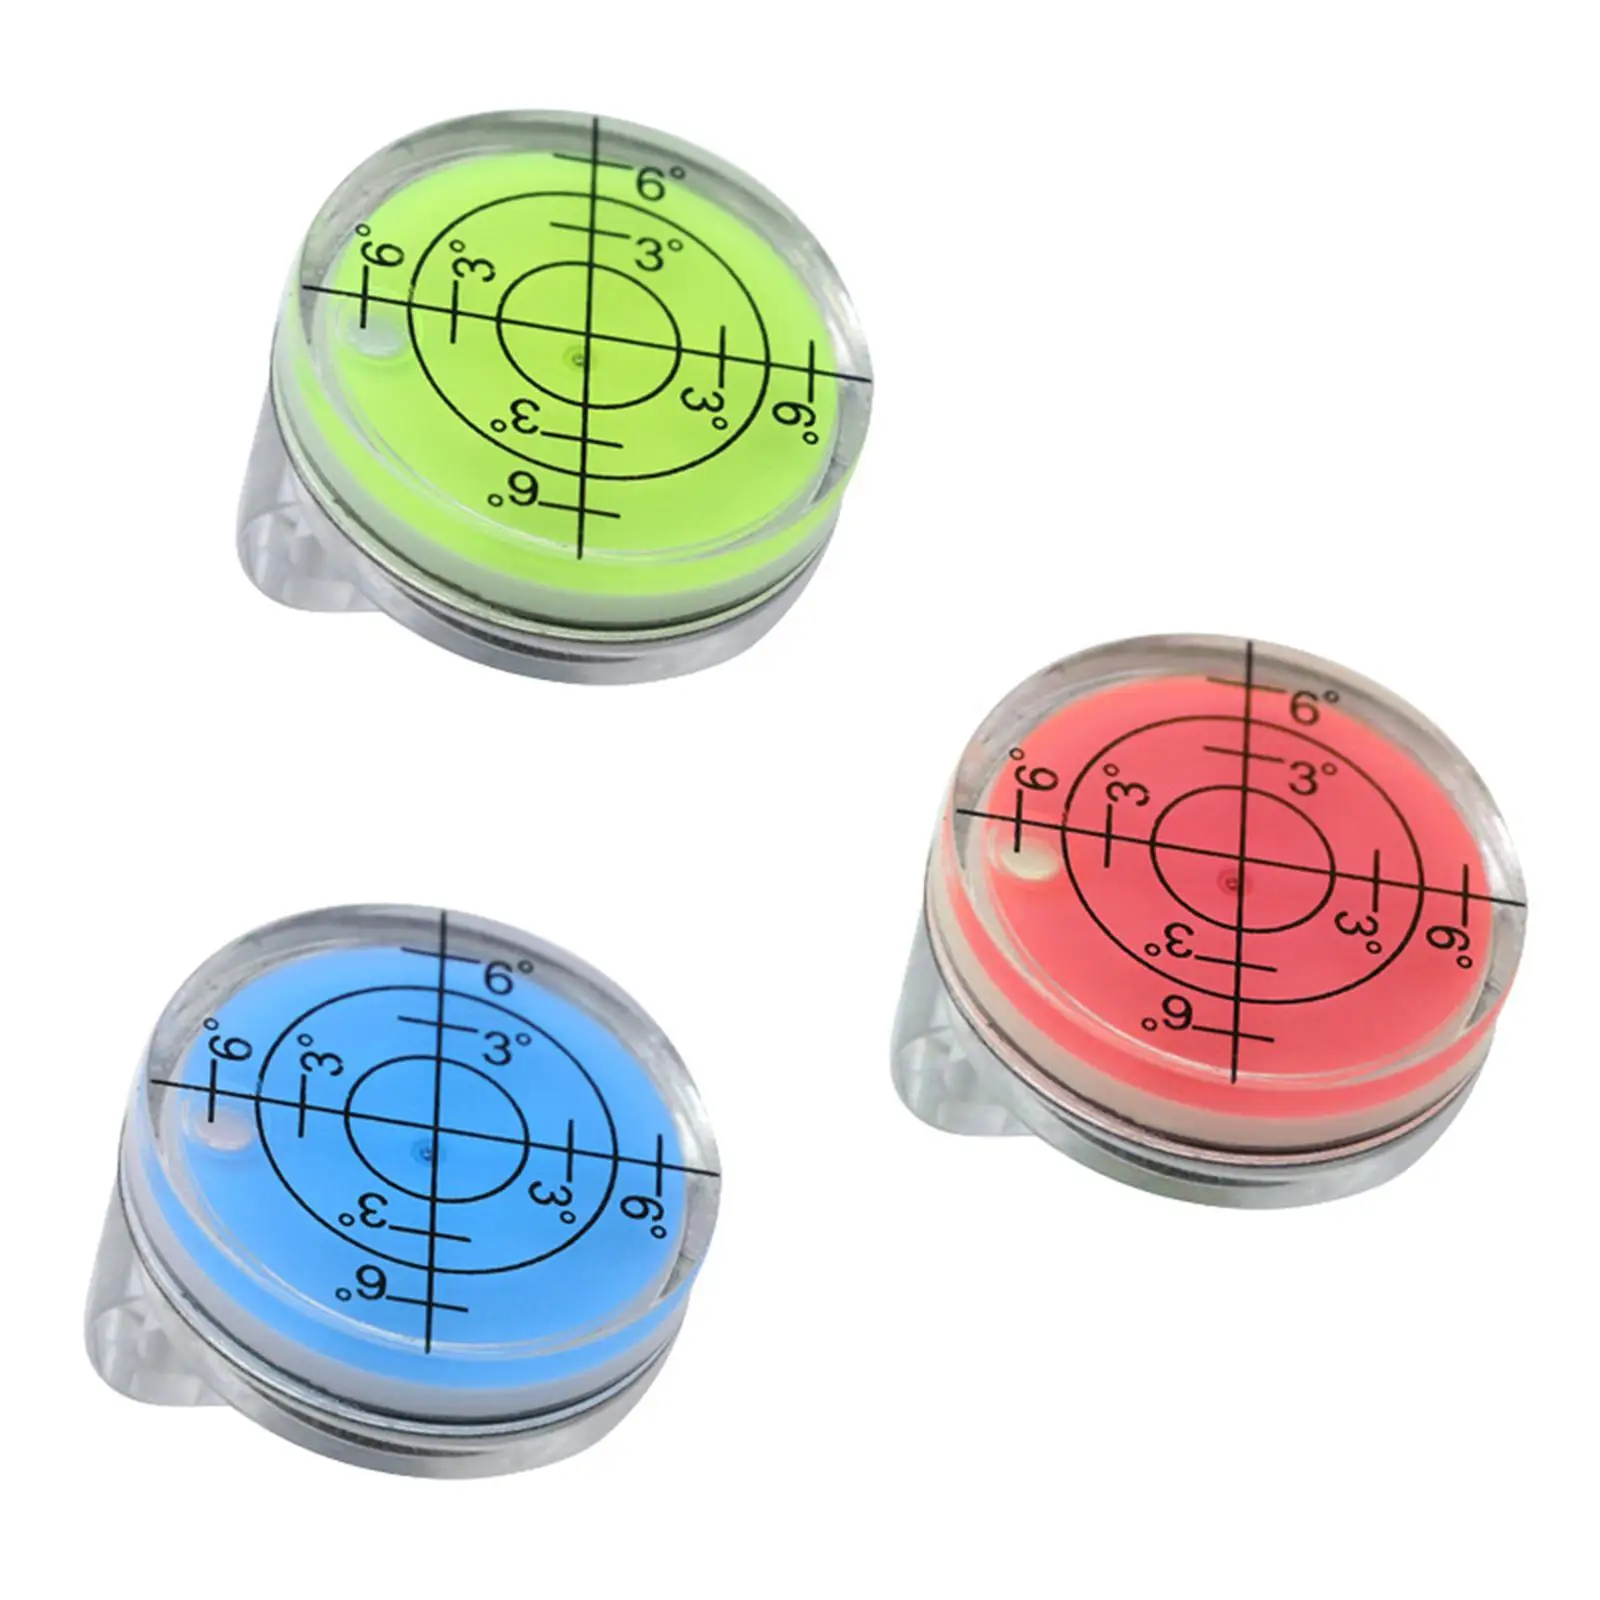 Golf Ball Marker Golf Hat Clip Golf Course Accessories Compact Outdoor Sports Ball Mark Putting Aid Cap Clip with Ball Marker